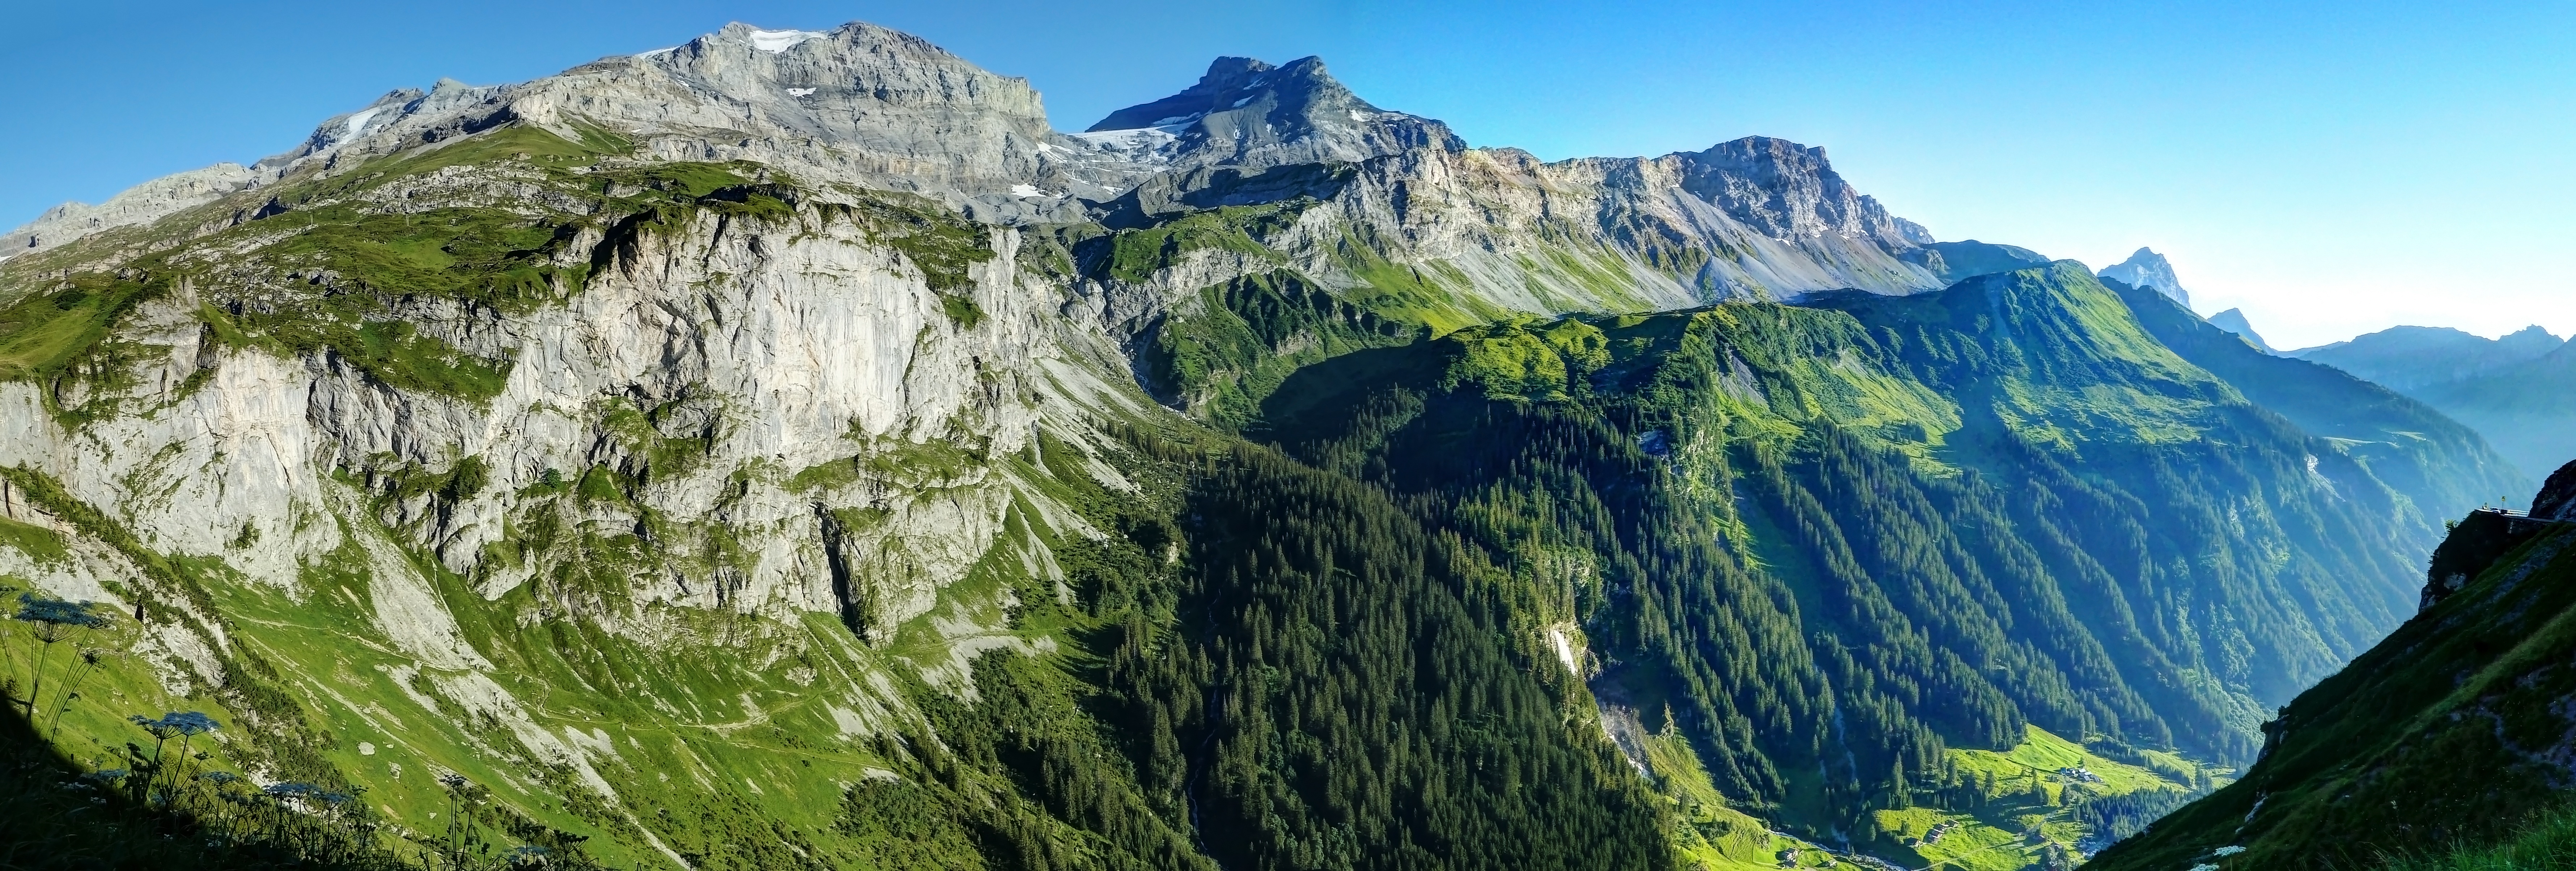 Beautiful Mountain landscape in the Swiss Alps image - Free stock photo